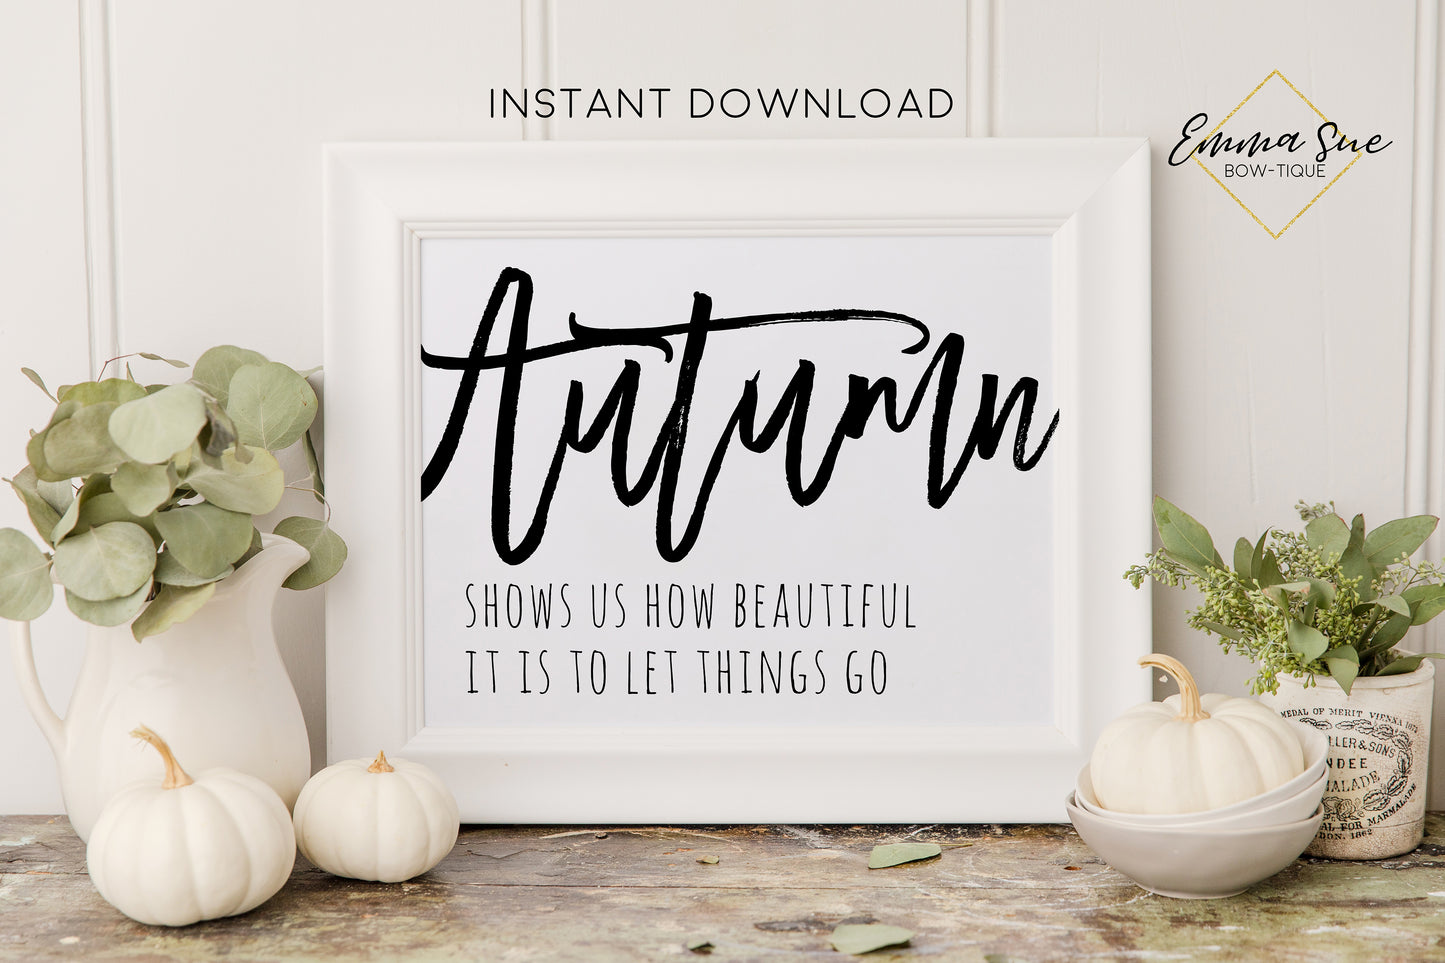 Autumn shows us how beautiful it is to let things go - Fall Autumn Decor Printable Farmhouse Sign - Digital File